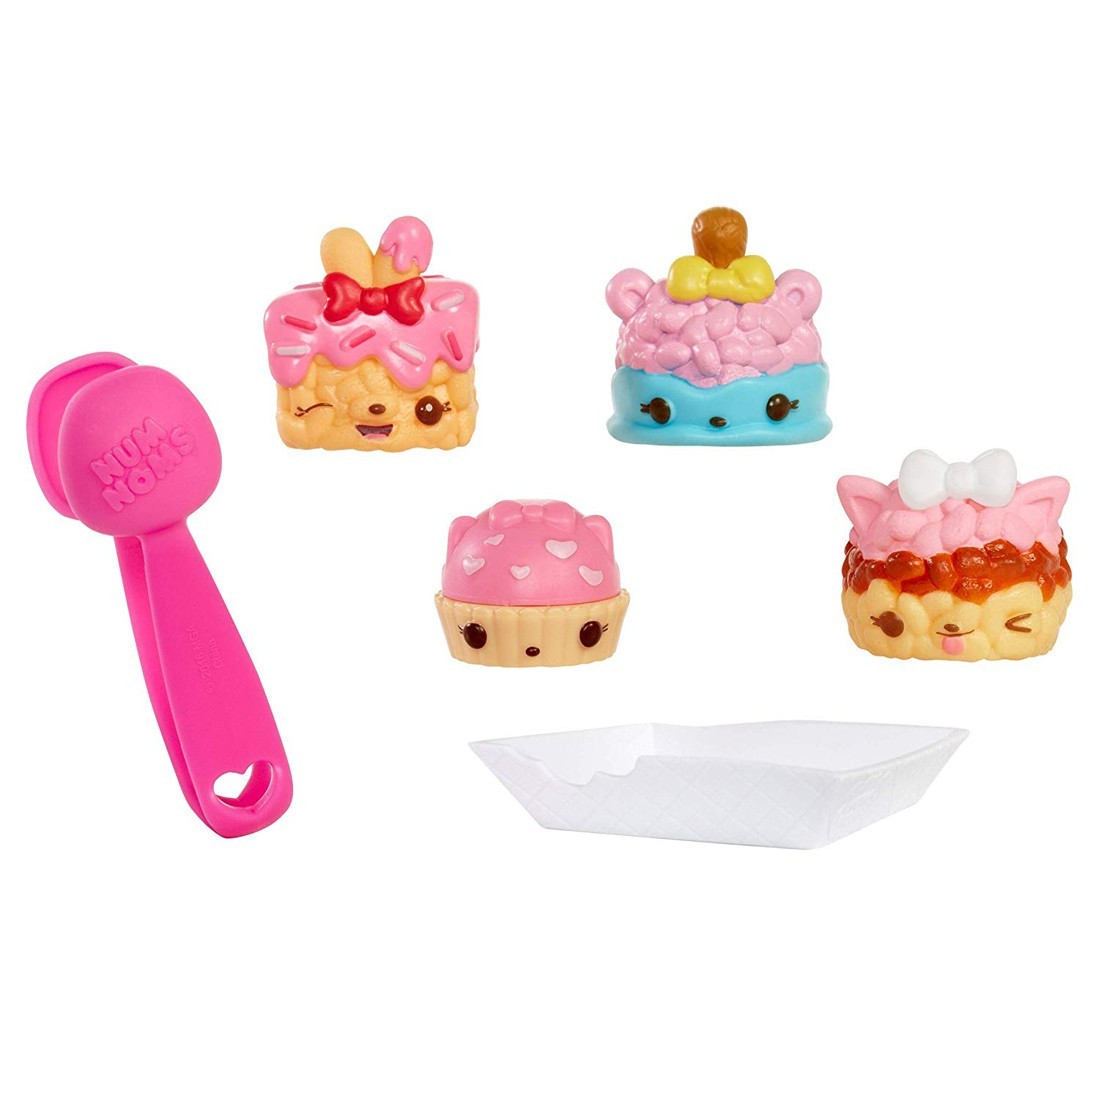 https://theoutfit.me/11832-thickbox_default/num-noms-549383-series-5-playset-starter-pack.jpg